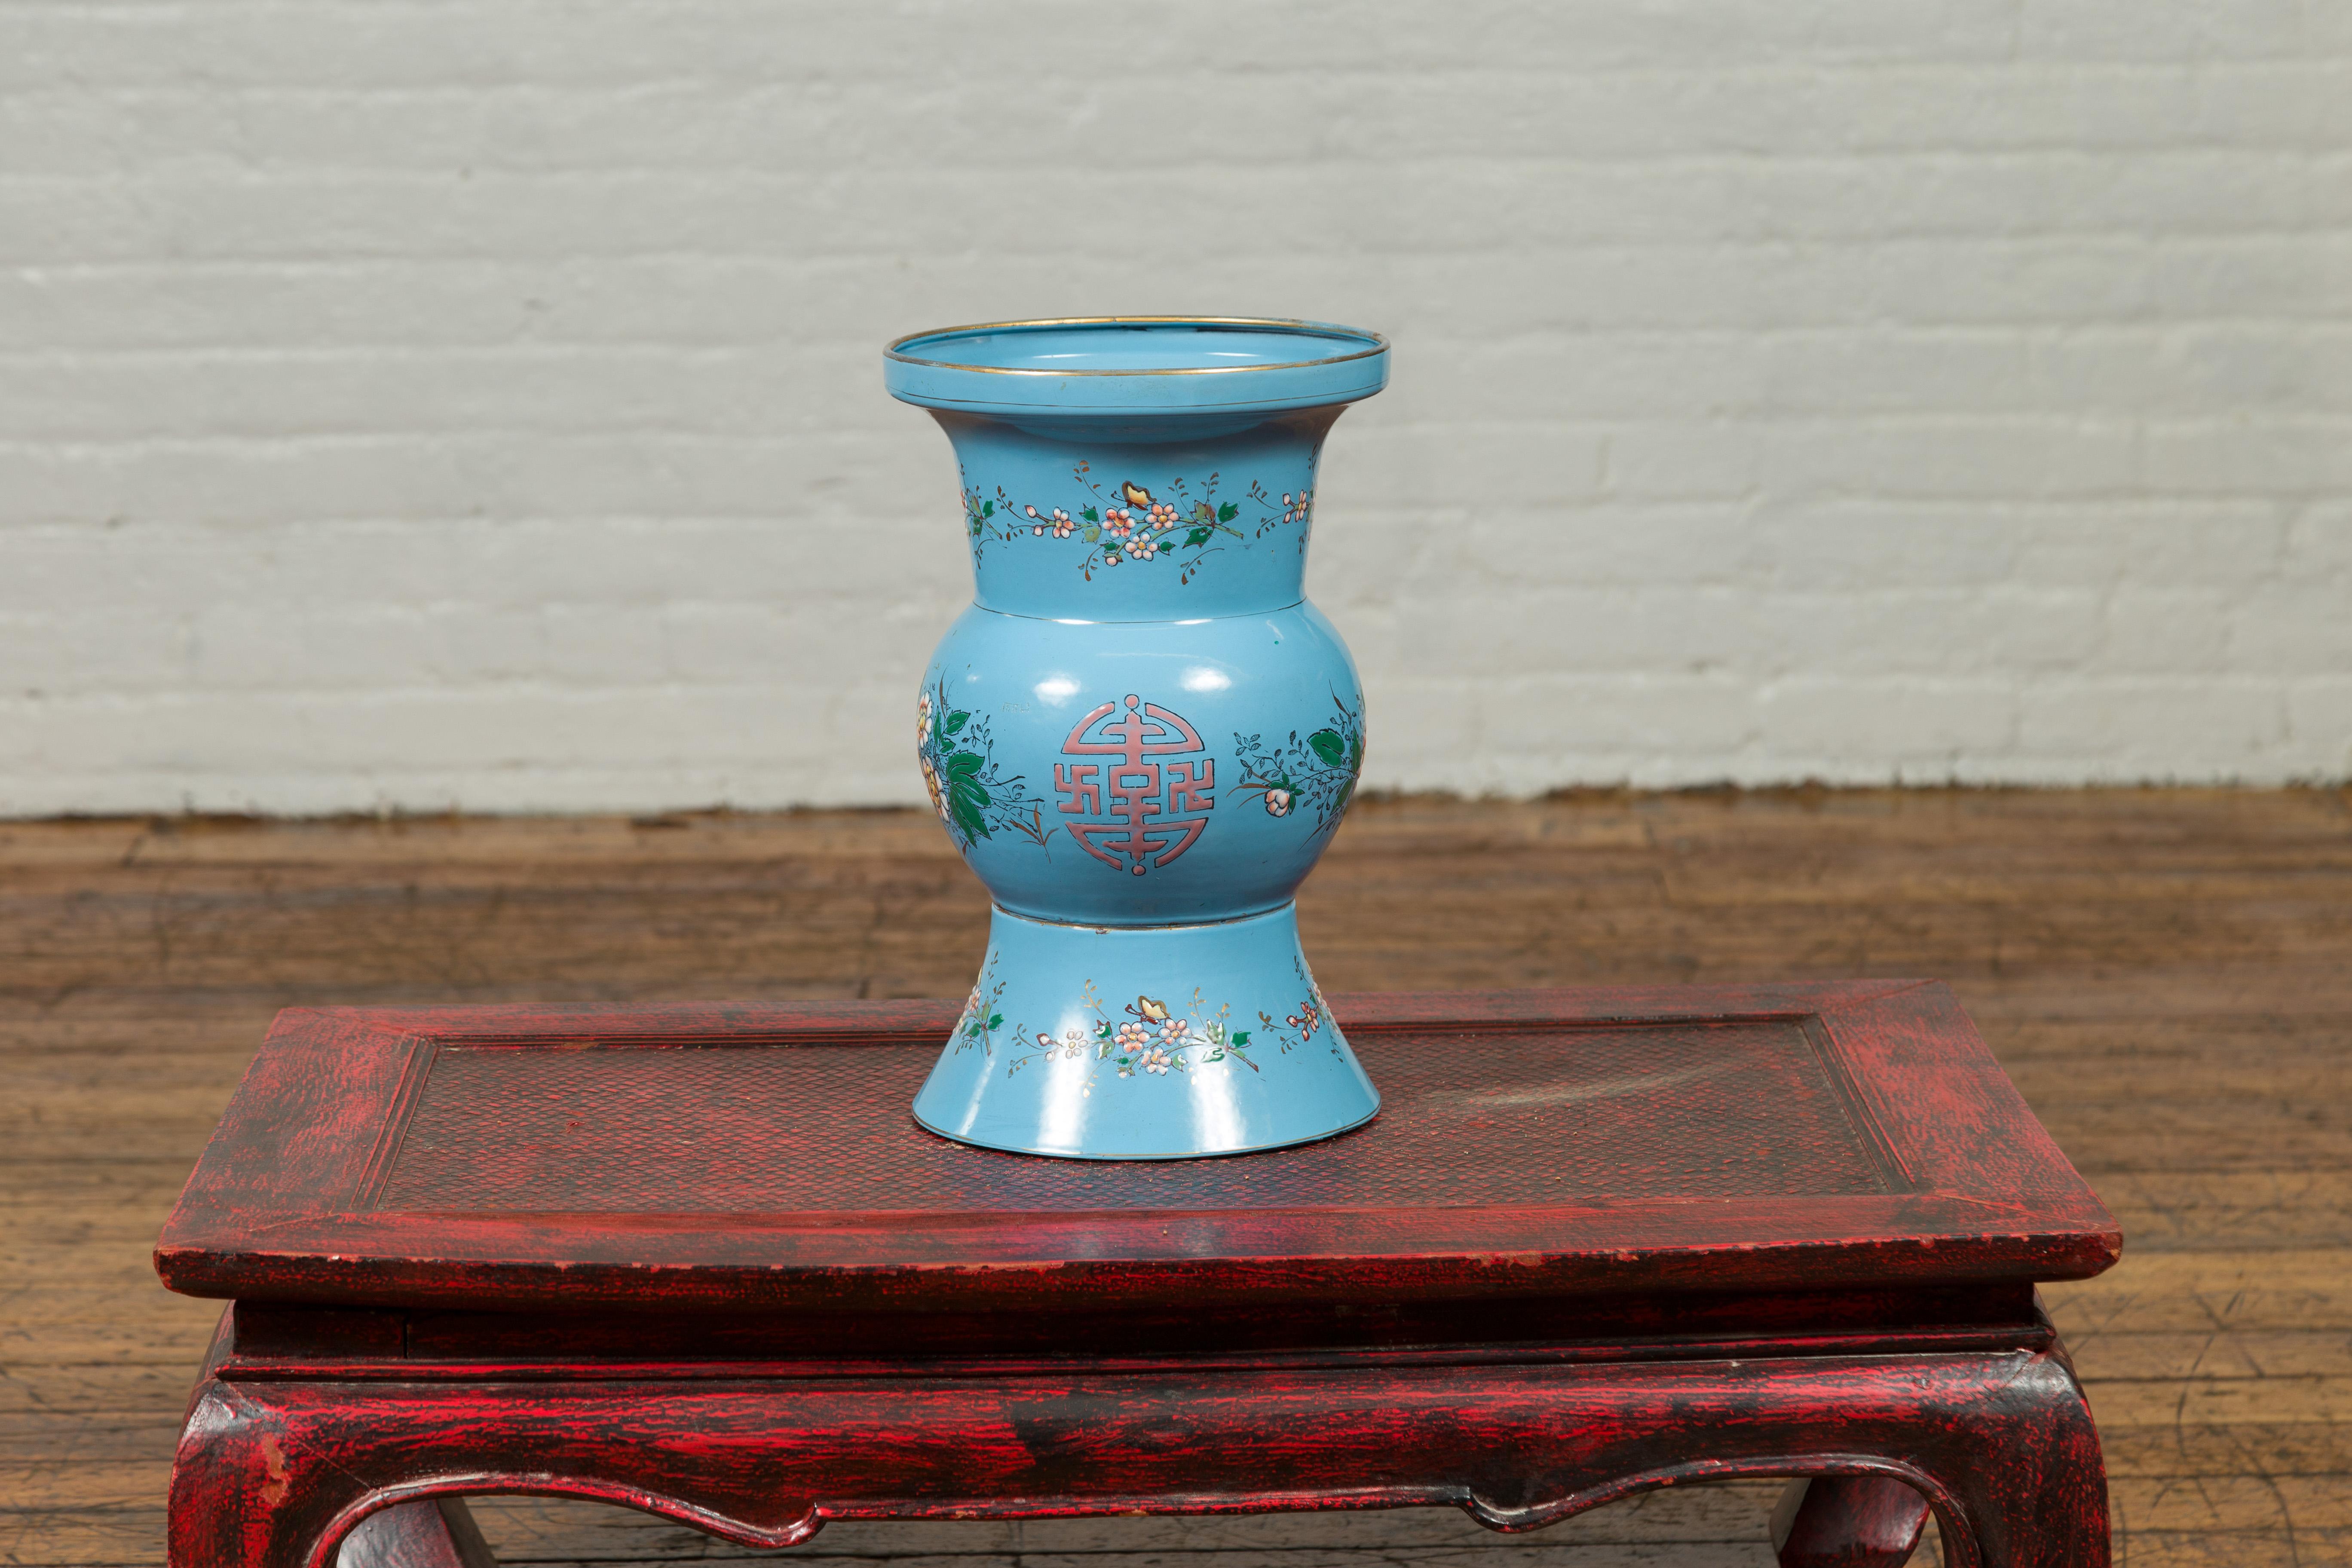 A vintage Chinese hand painted blue metal vase from the mid-20th century with calligraphy and floral décor. Crafted in China during the midcentury period, this charming vase attracts our attention with its soft blue ground accented with calligraphy